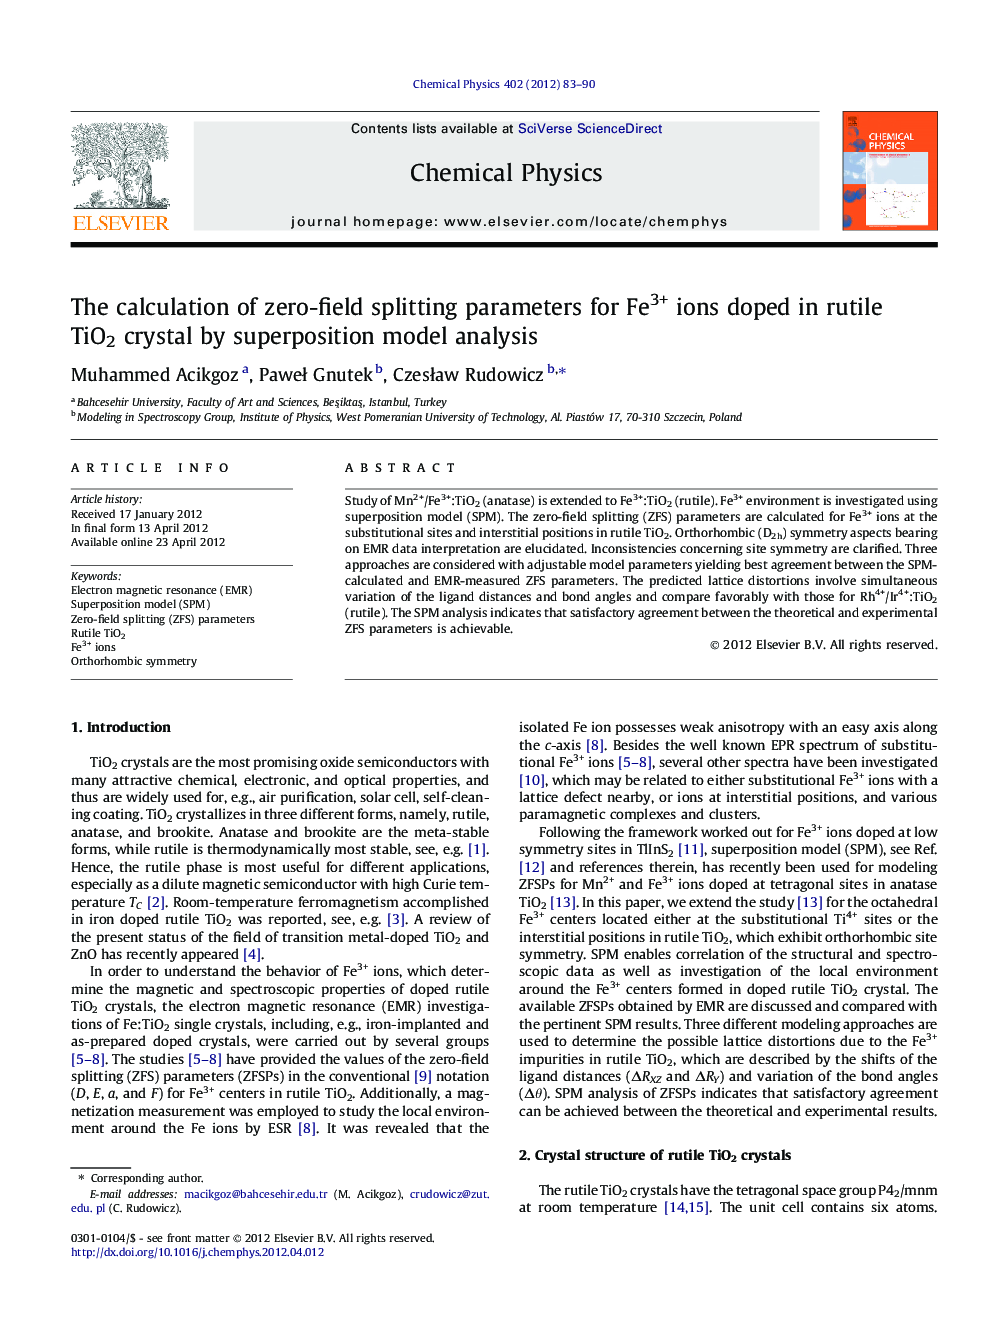 The calculation of zero-field splitting parameters for Fe3+ ions doped in rutile TiO2 crystal by superposition model analysis